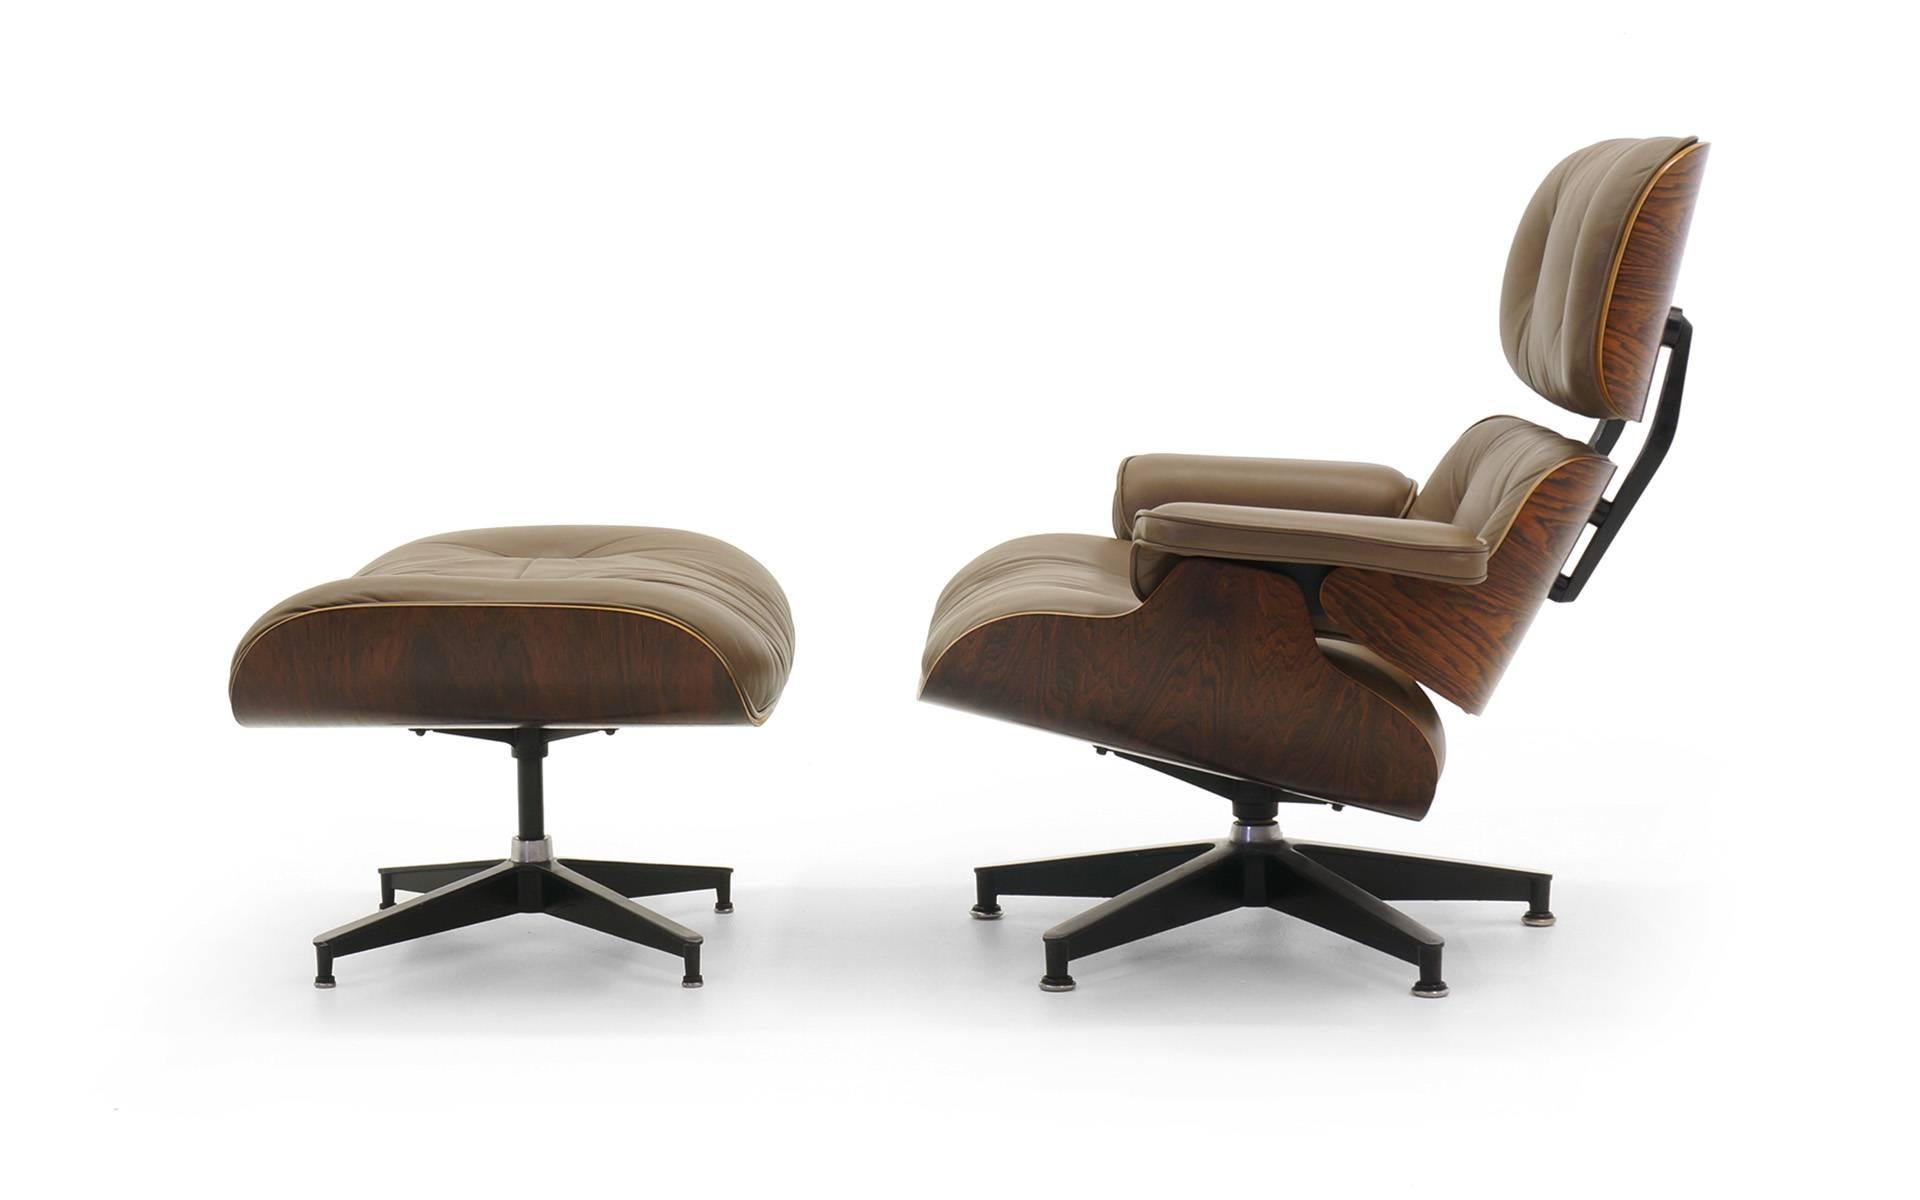 1970s custom ordered khaki leather lounge chair and ottoman designed by Charles and Ray Eames for Herman Miller. This is one of the best we have seen. Never before have we seen this riginal custom color leather and it is in extremely good condition.